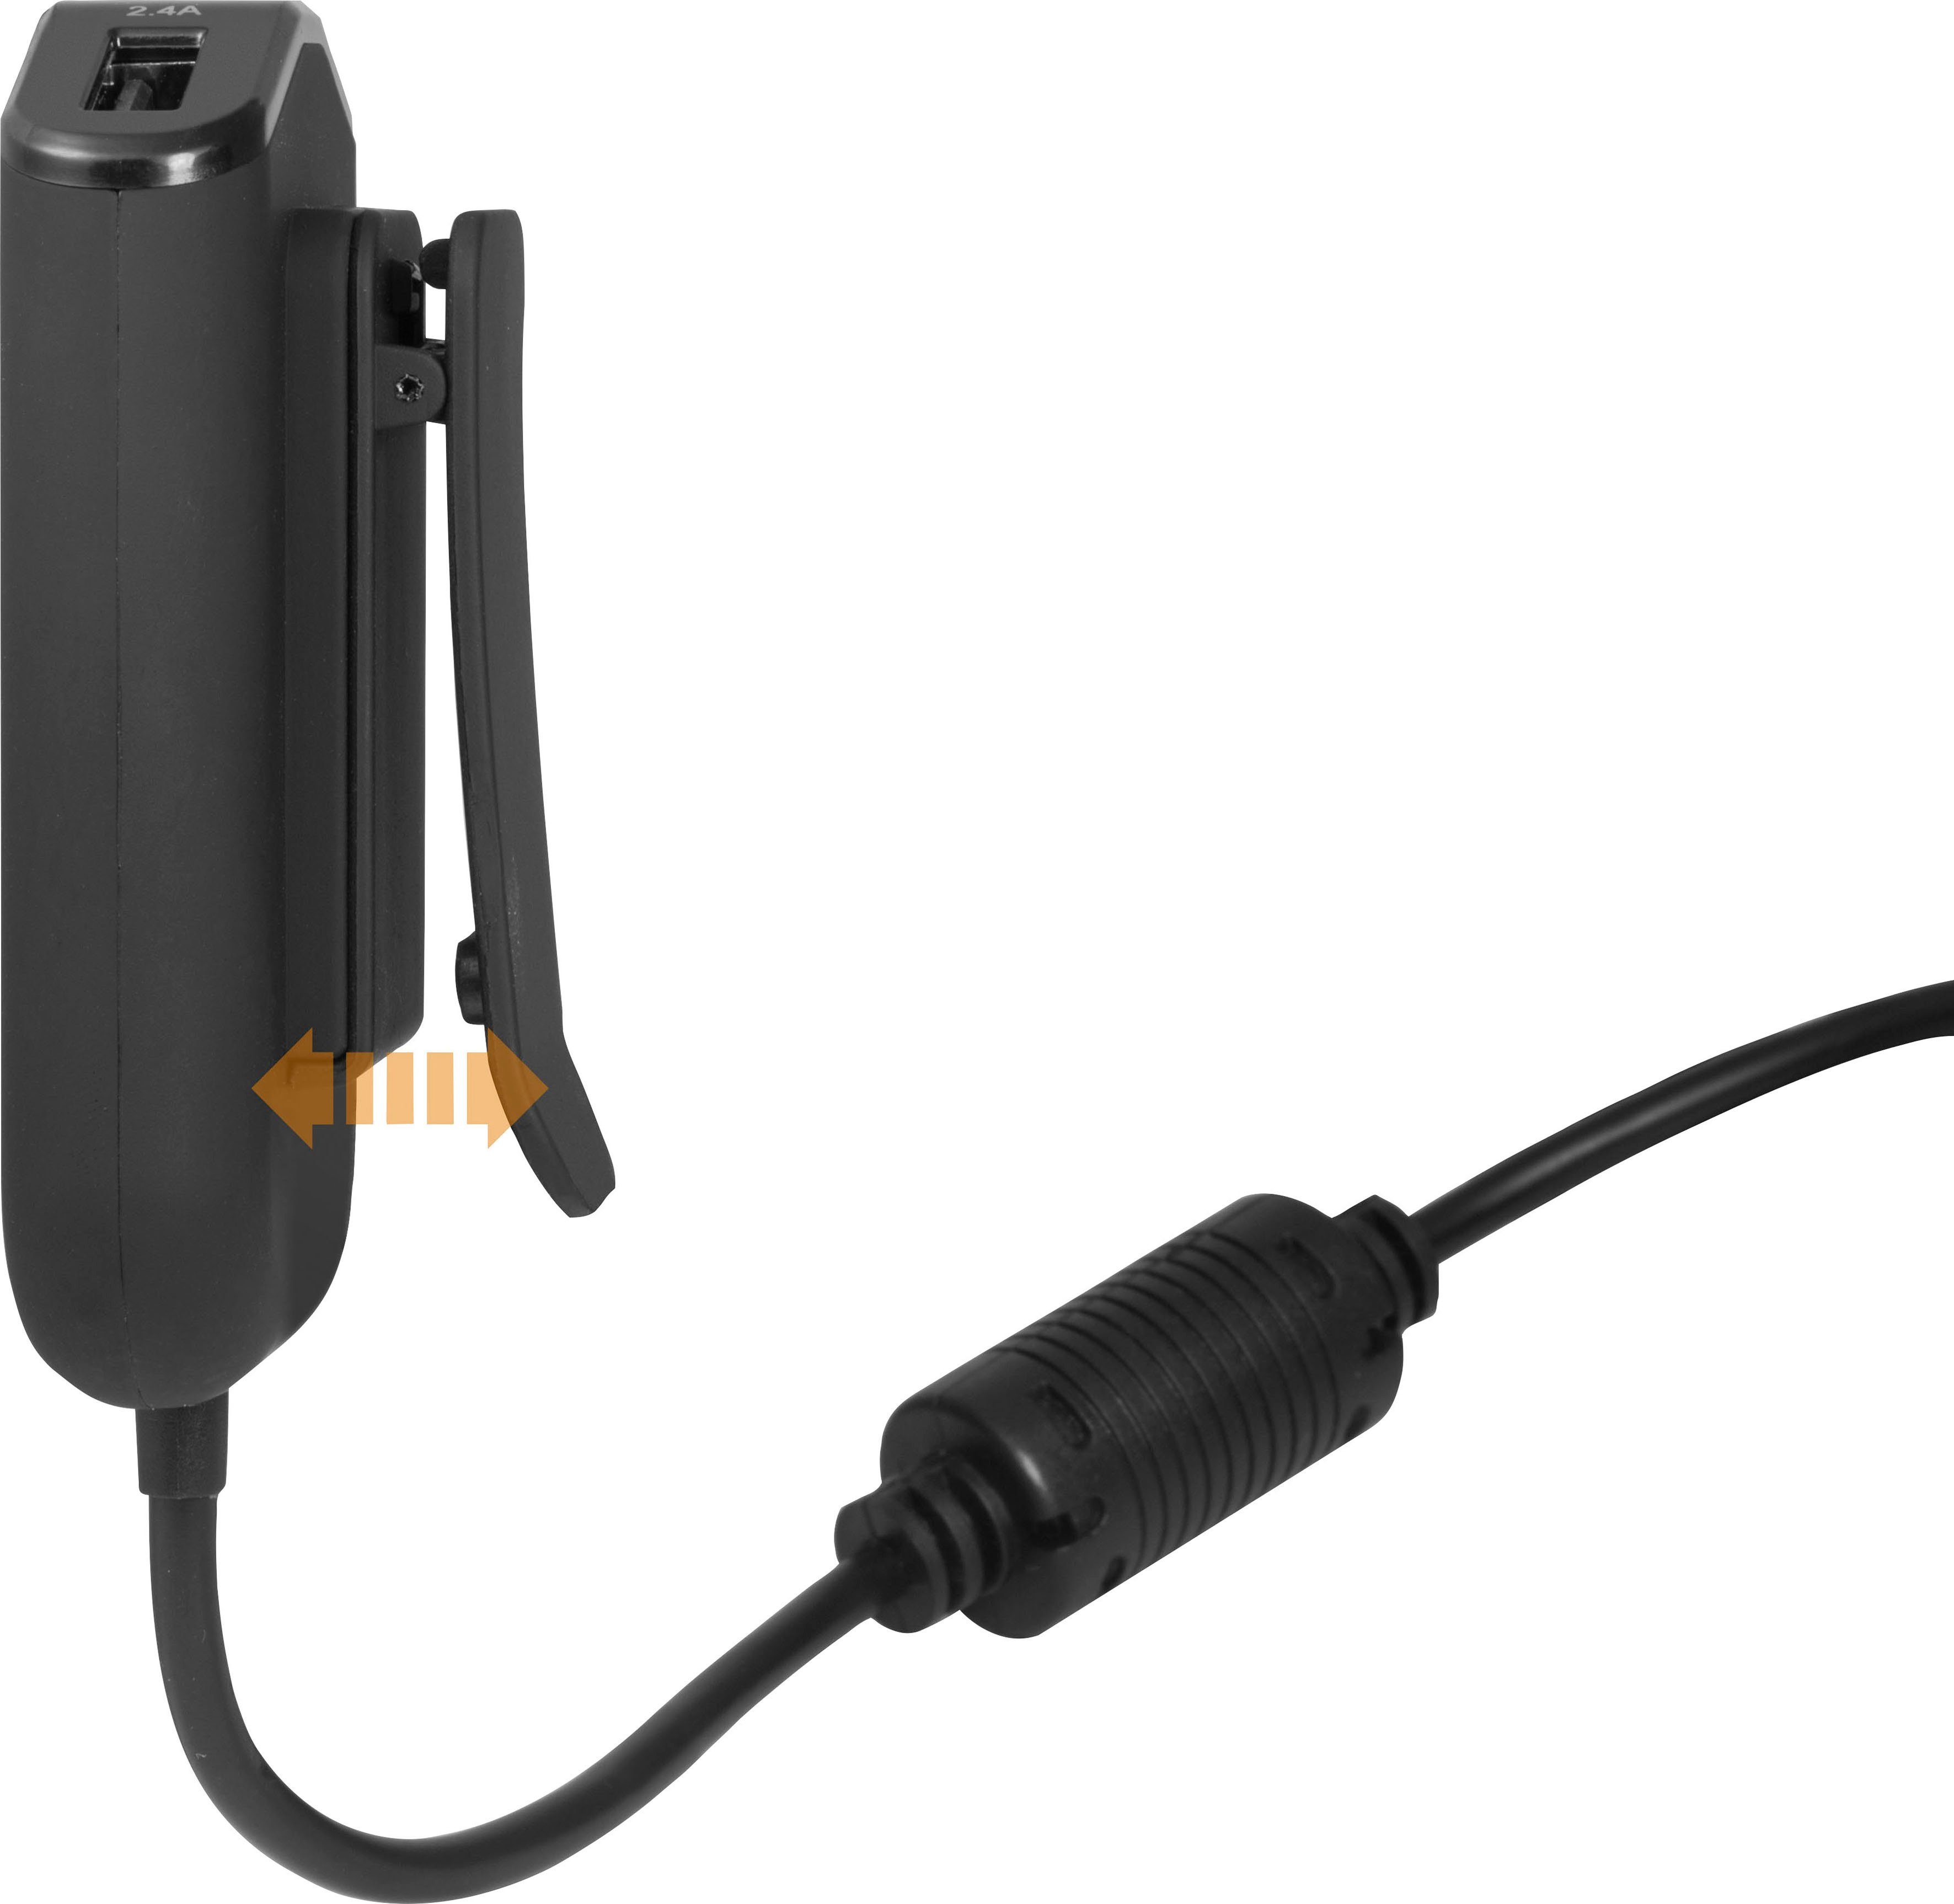 Car Technaxx KFZ-Adapter Family Charger TE14